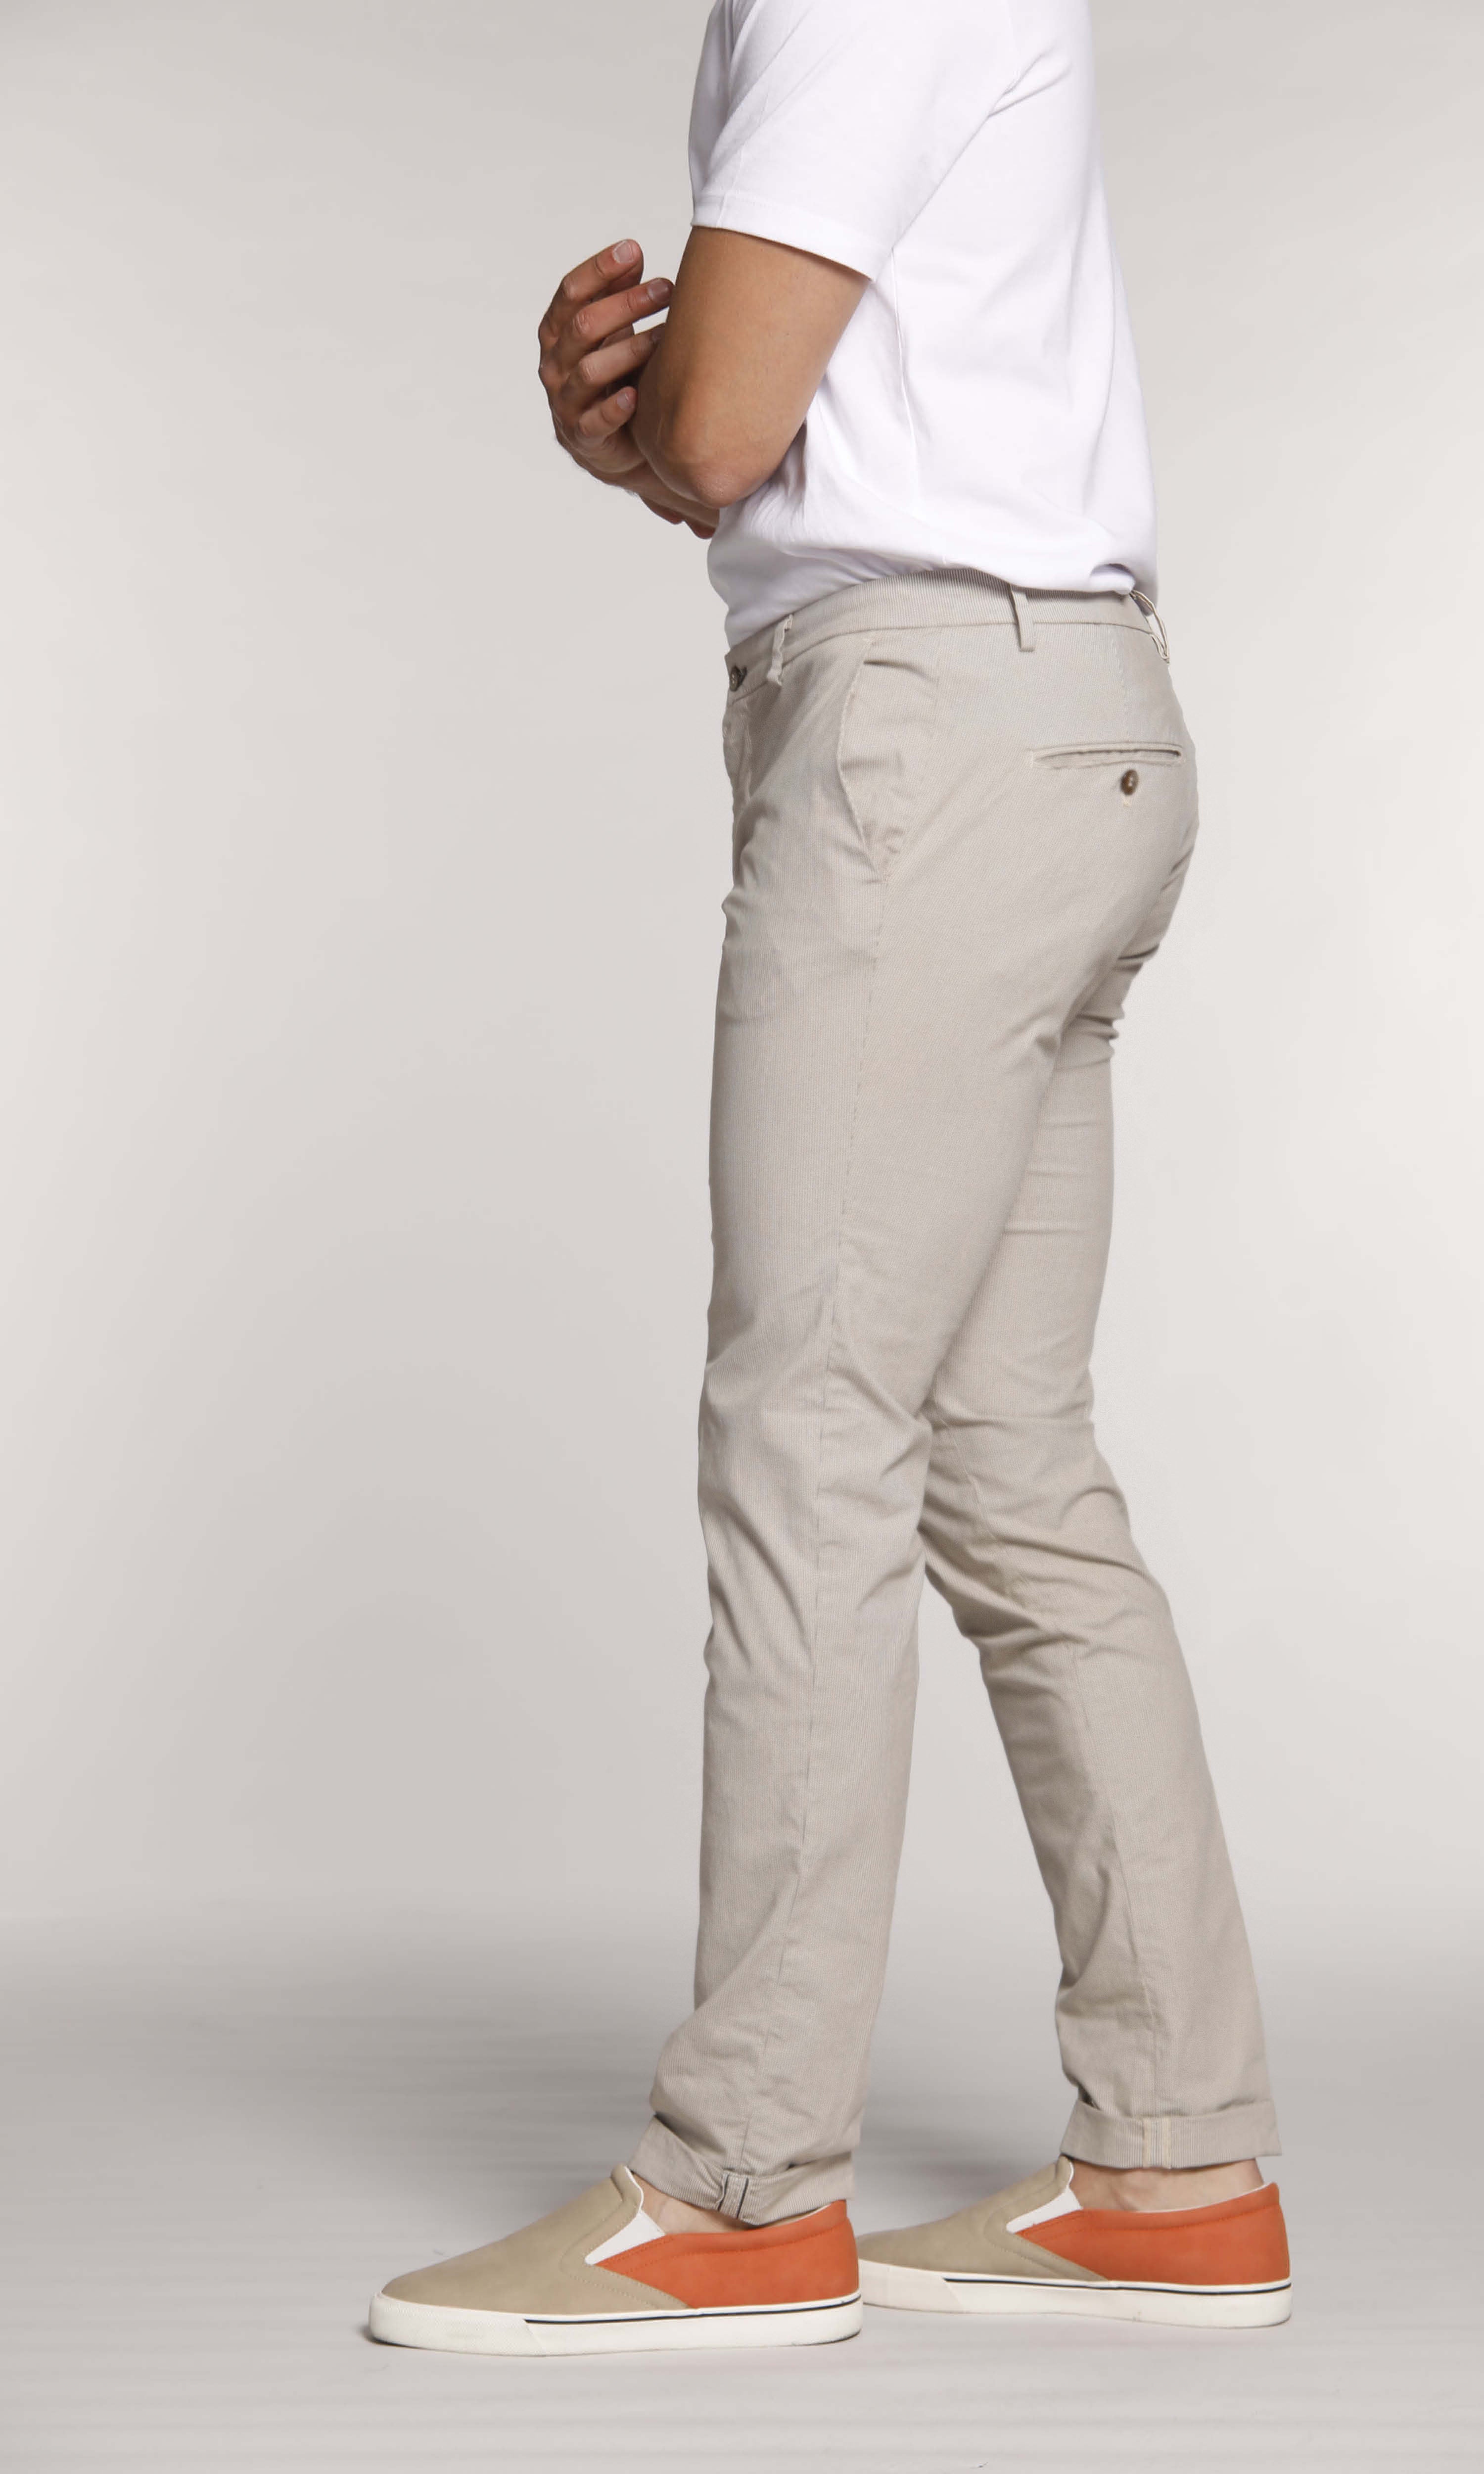 Milano Limited man chino pants in cotton and tencel with stripes pattern extra slim